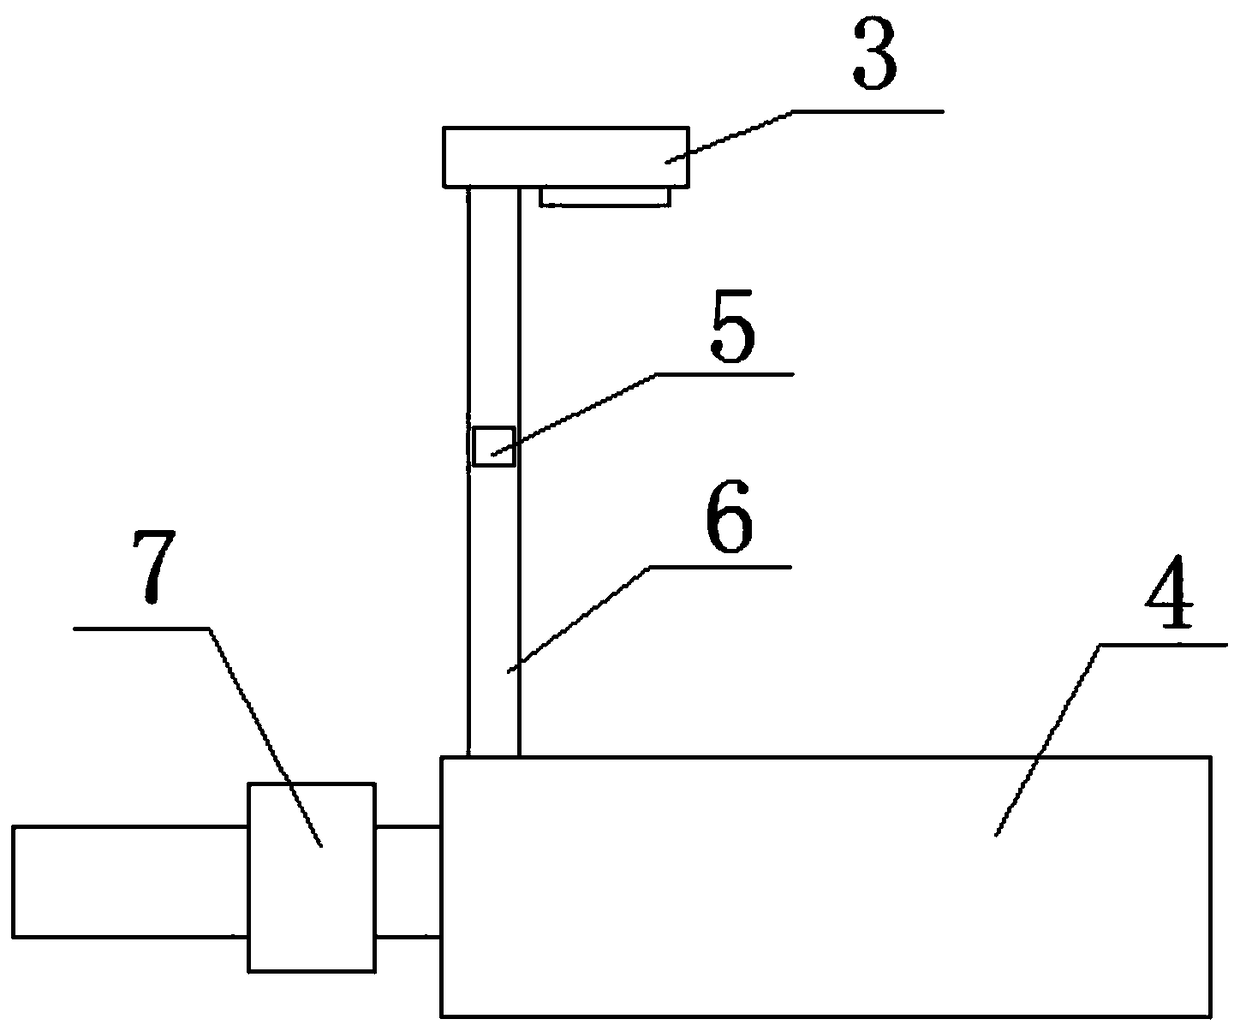 Nighttime water drinking device for captive breeding cows